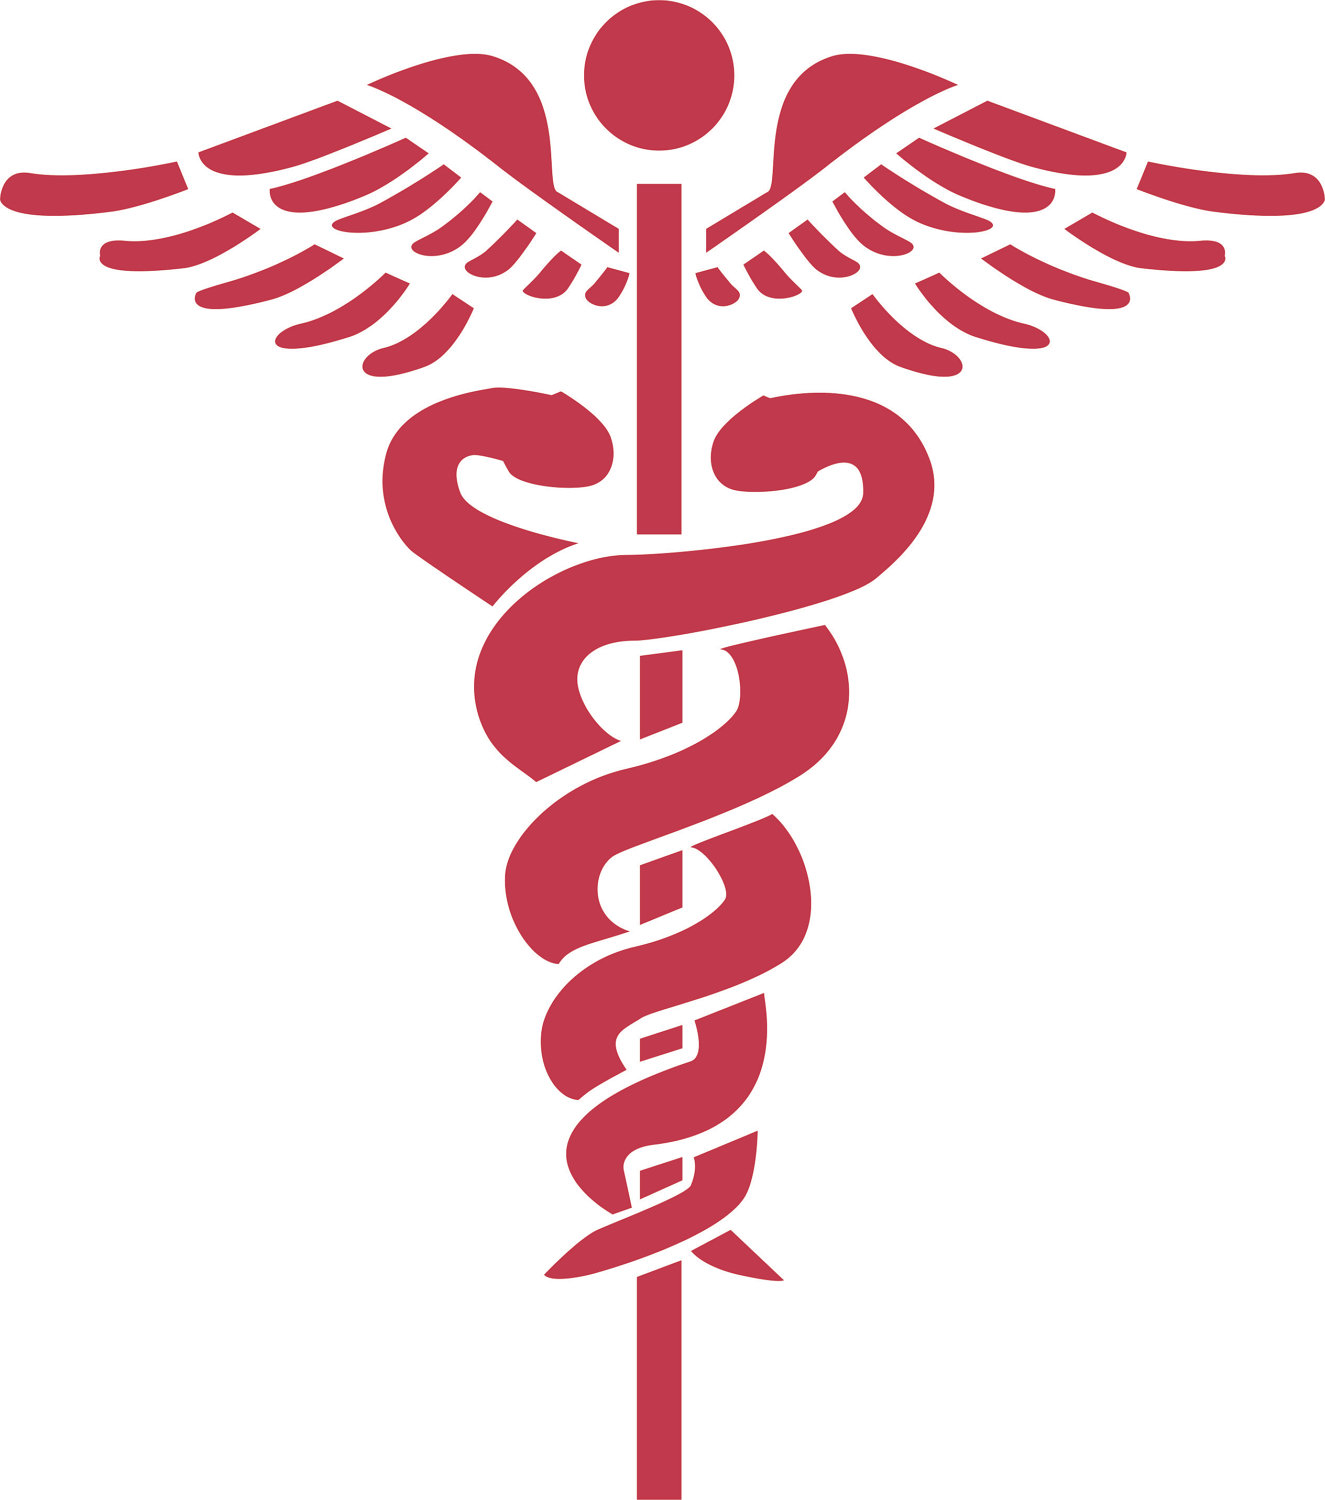 15 Nursing Symbol Free Cliparts That You Can Download To You Computer    